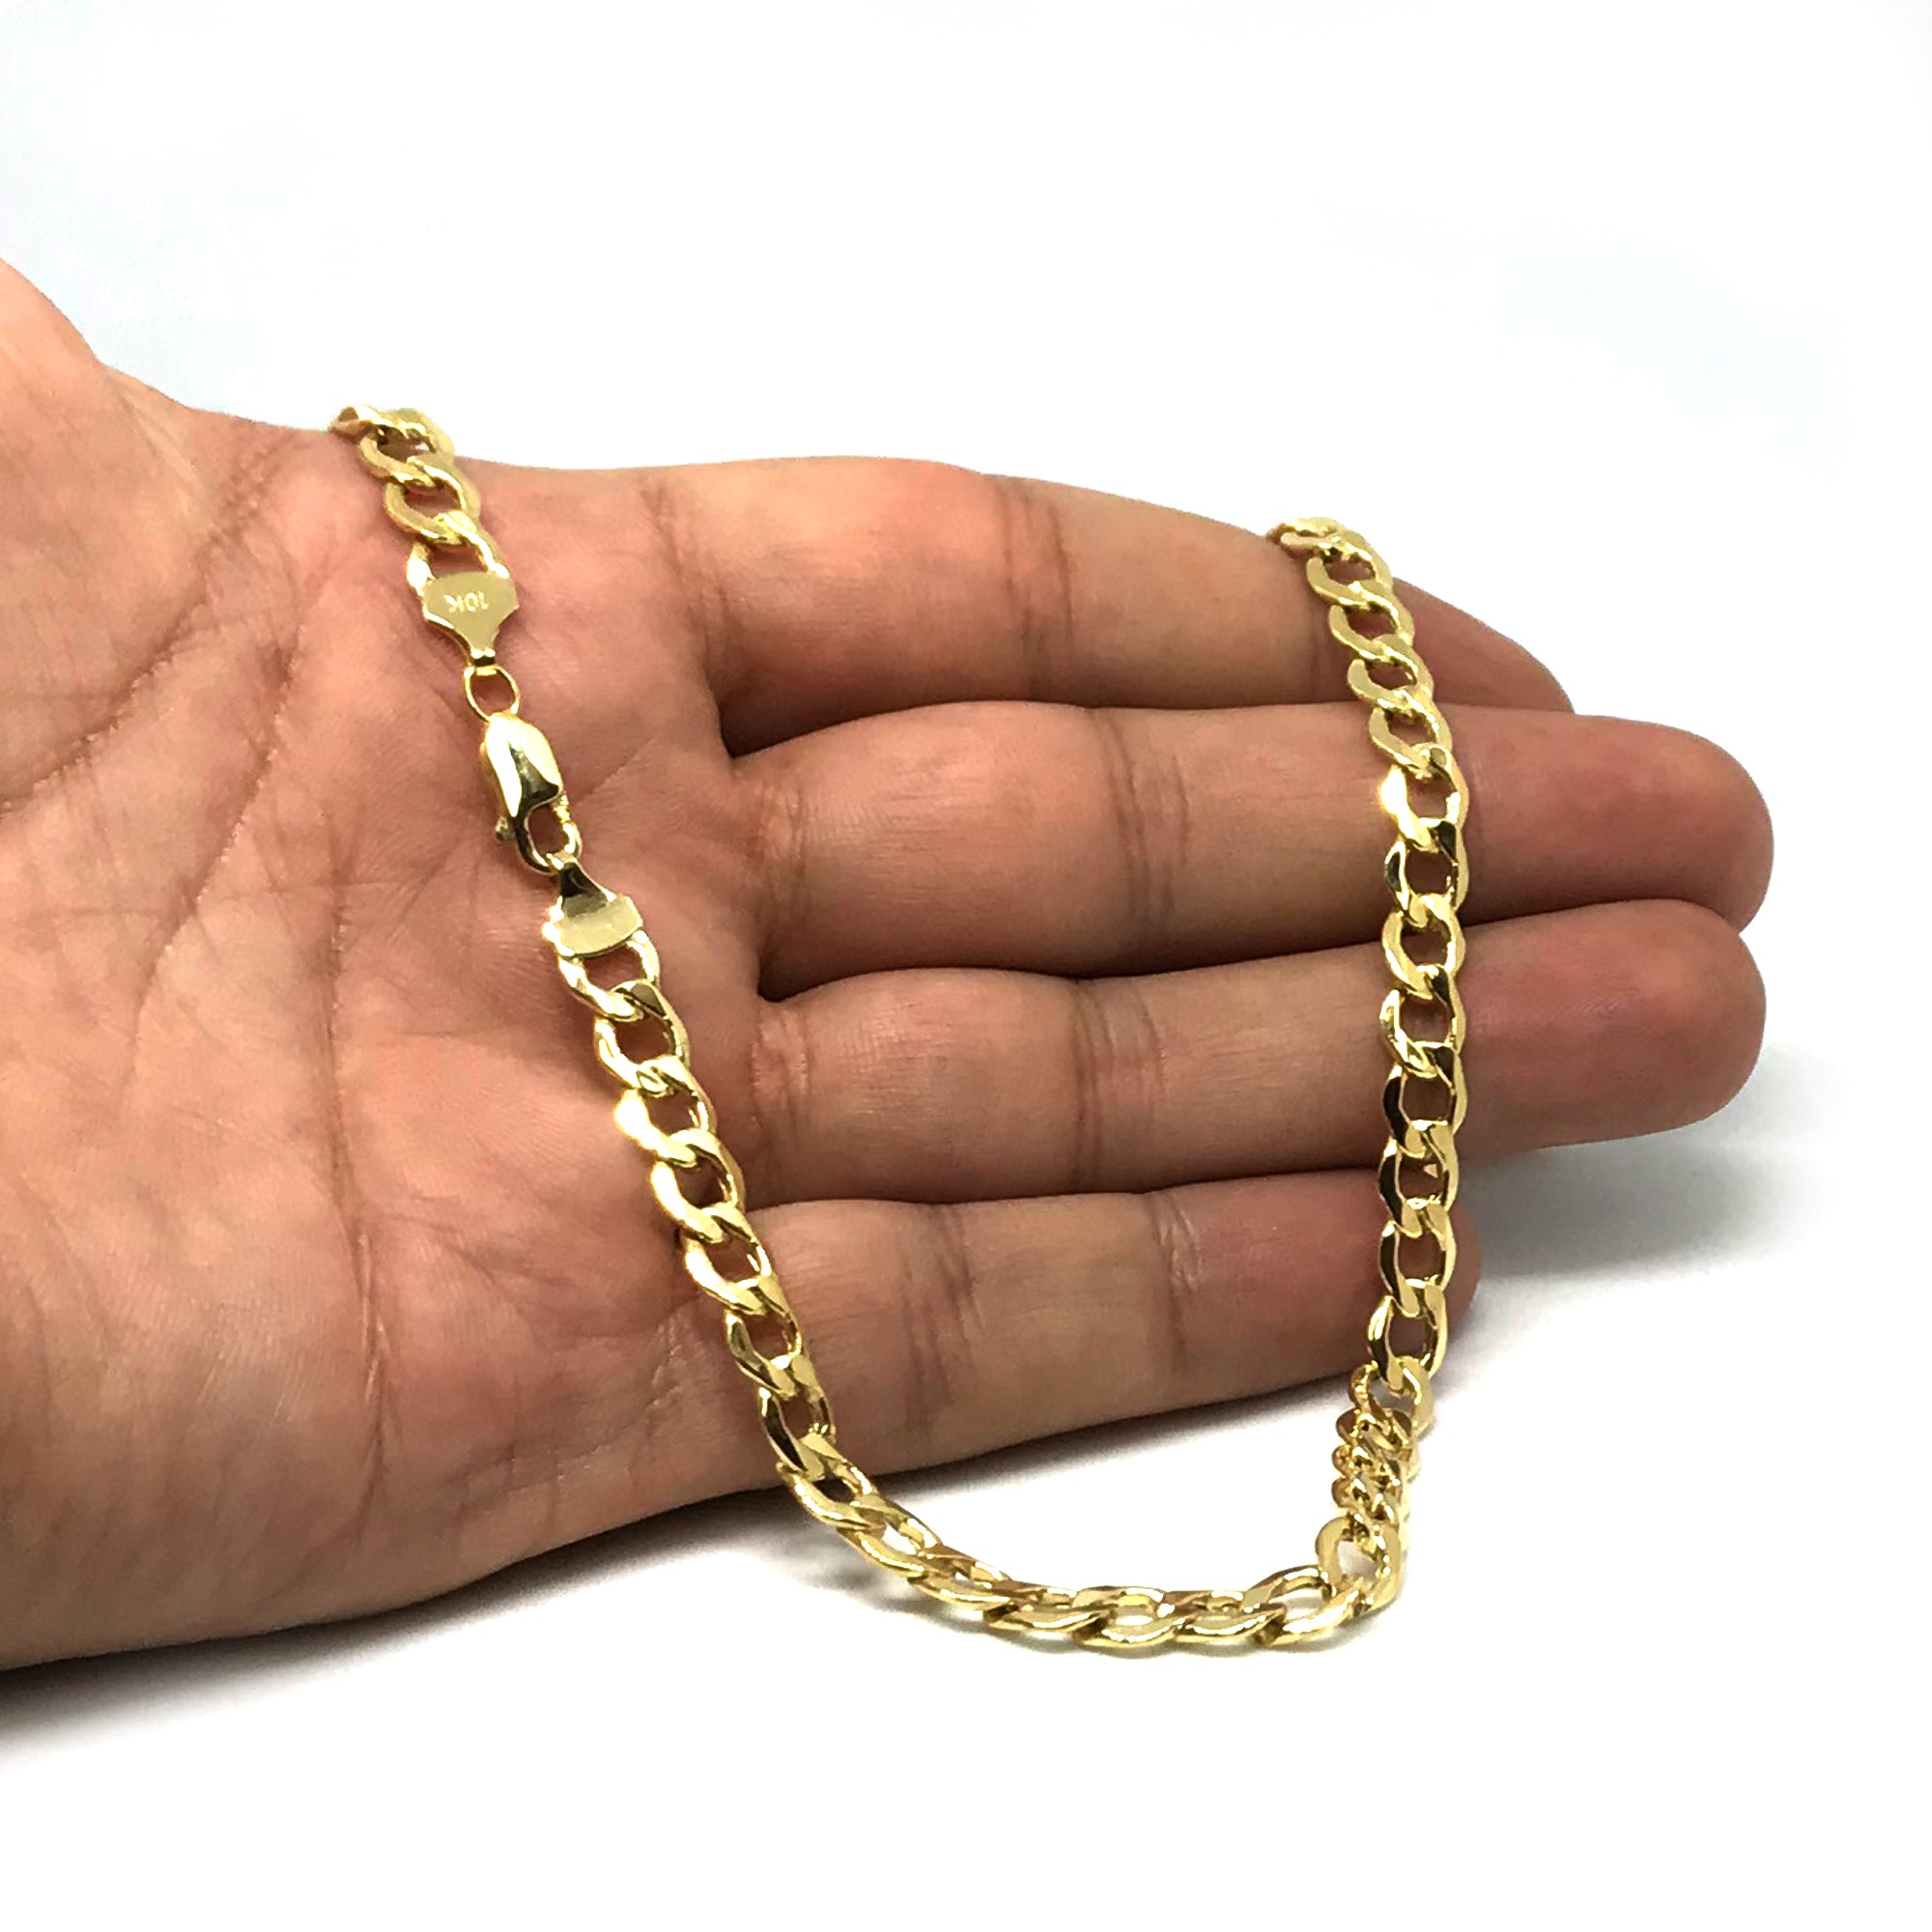 10k Yellow Gold Curb Hollow Chain Necklace, 6.1mm